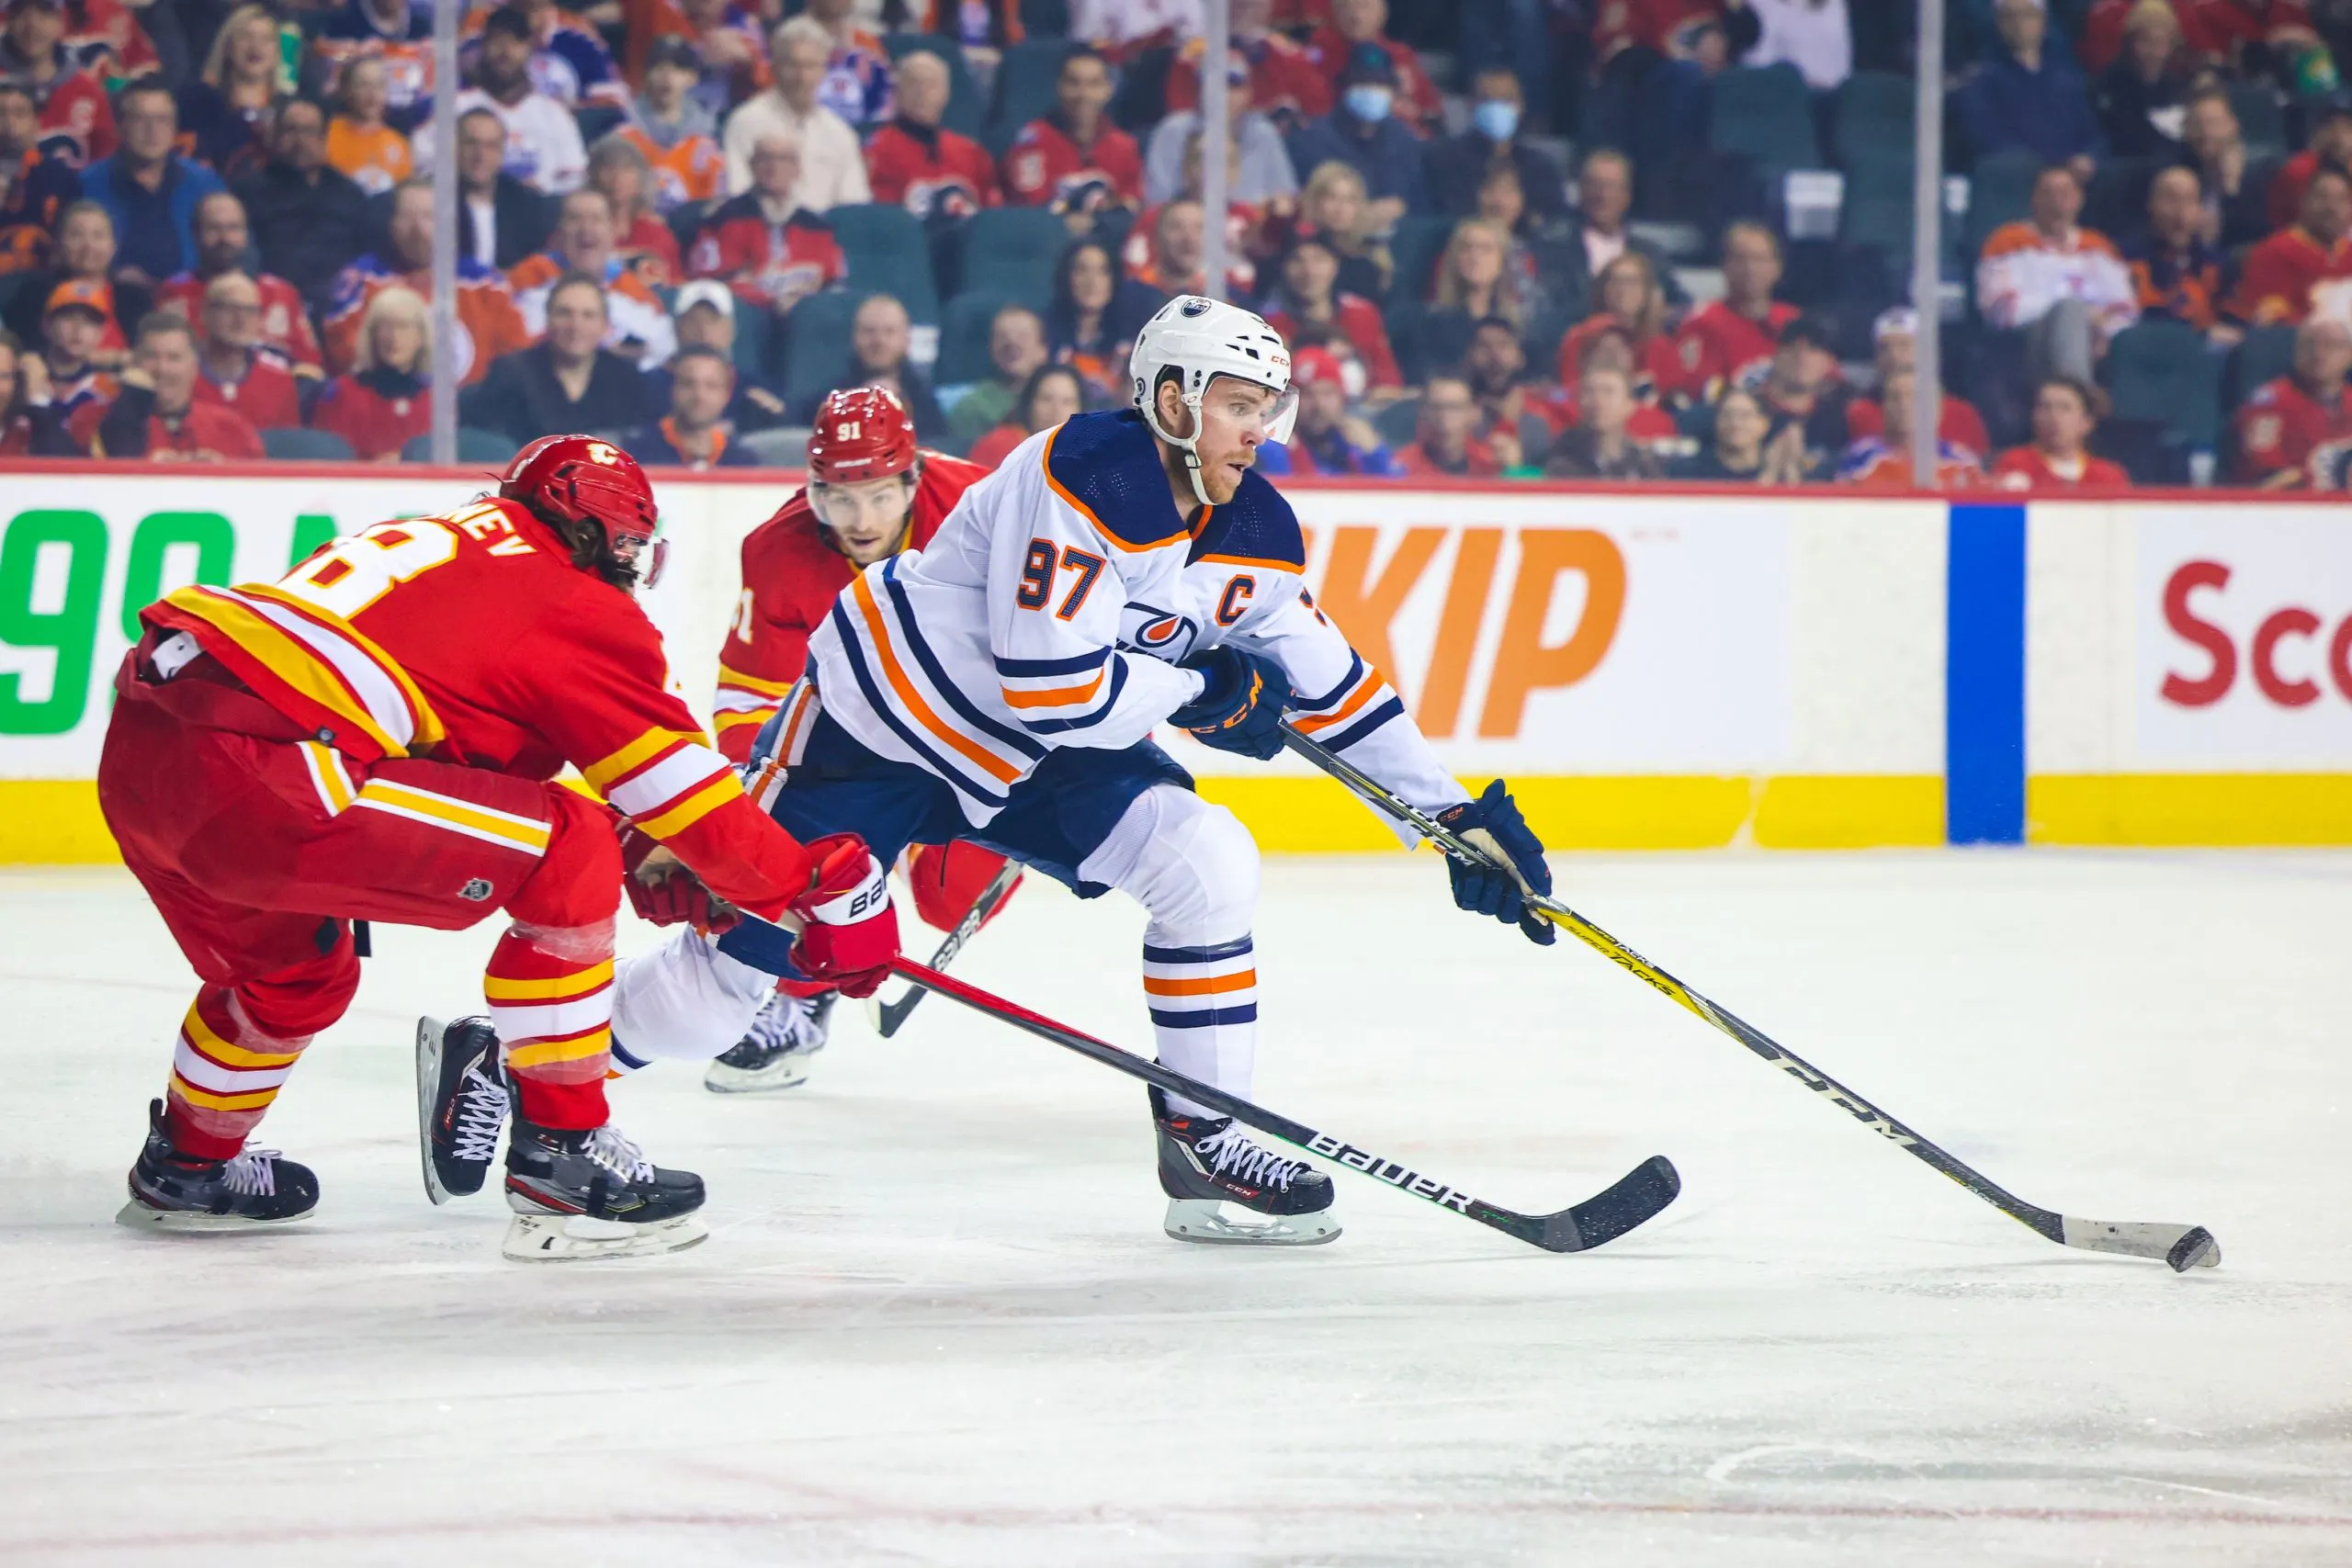 Calgary Flames vs. Edmonton Oilers: Stanley Cup playoff series preview and pick